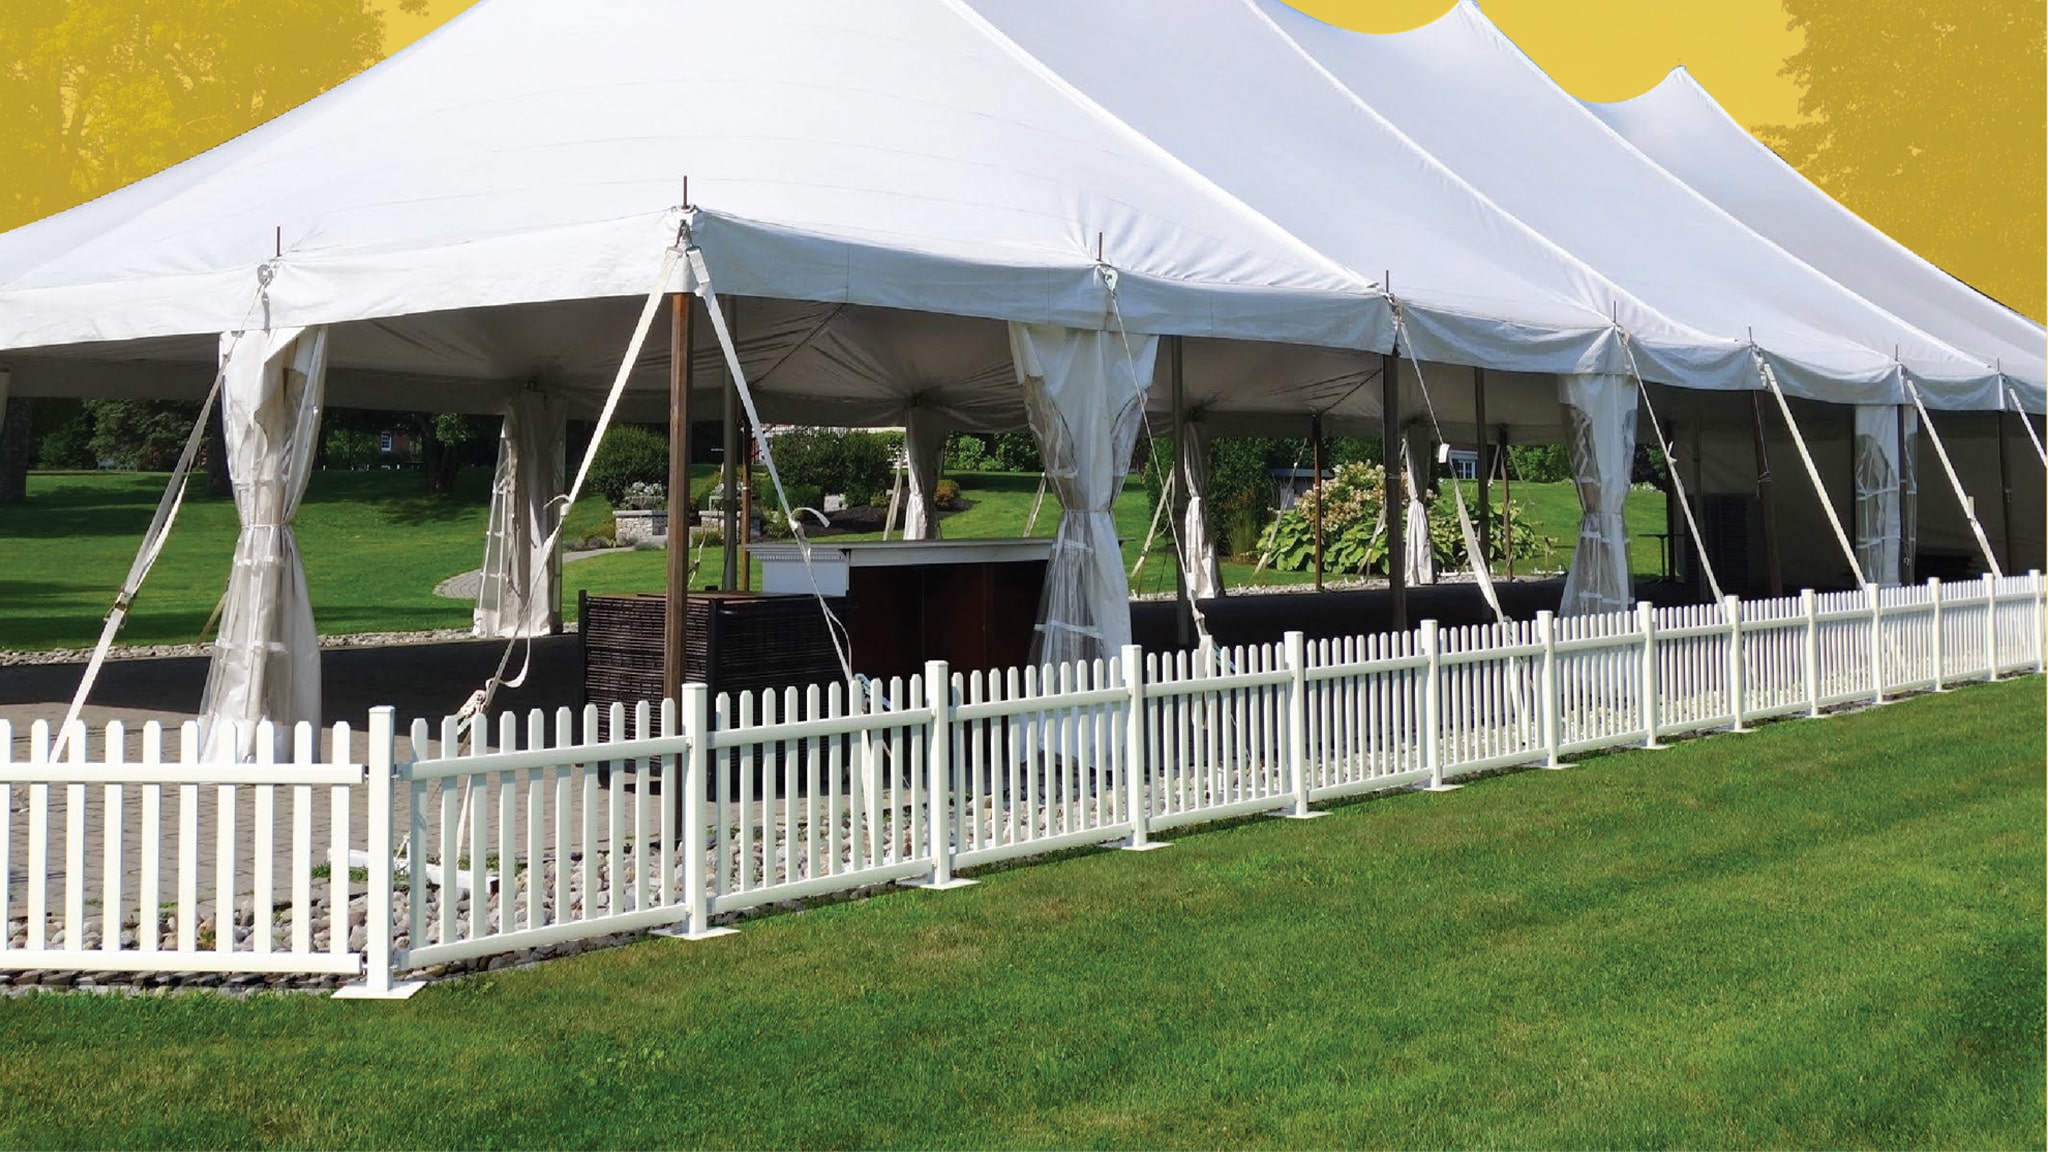 Mod-Fence Temporary Tent Fencing